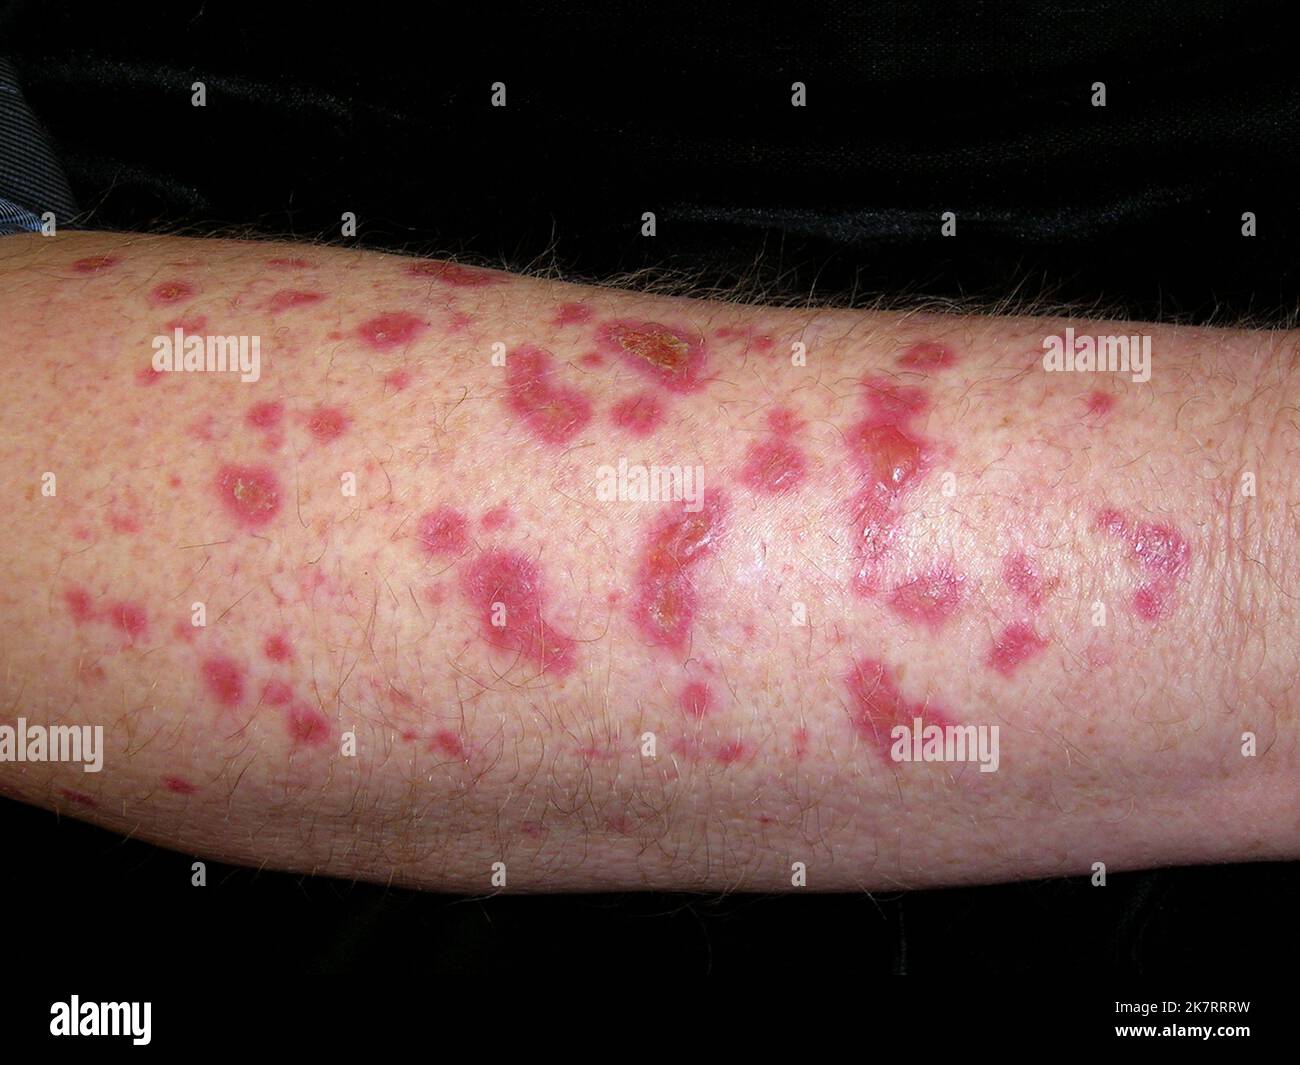 Actinic keratoses on the arm of a 61 year old white male patient ...